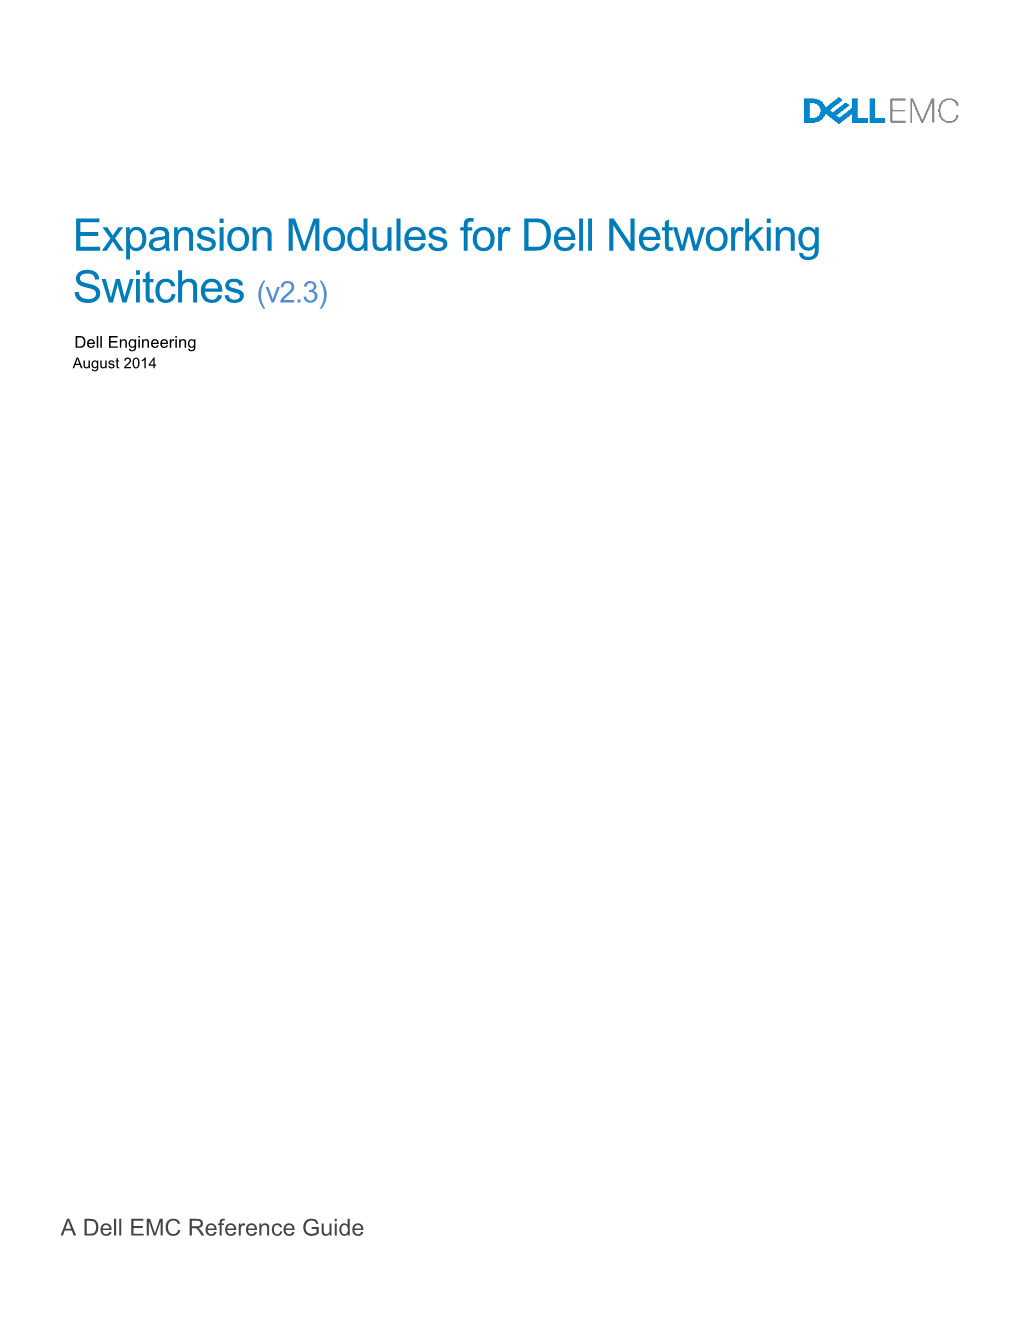 Expansion Modules for Dell Networking Switches (V2.3)